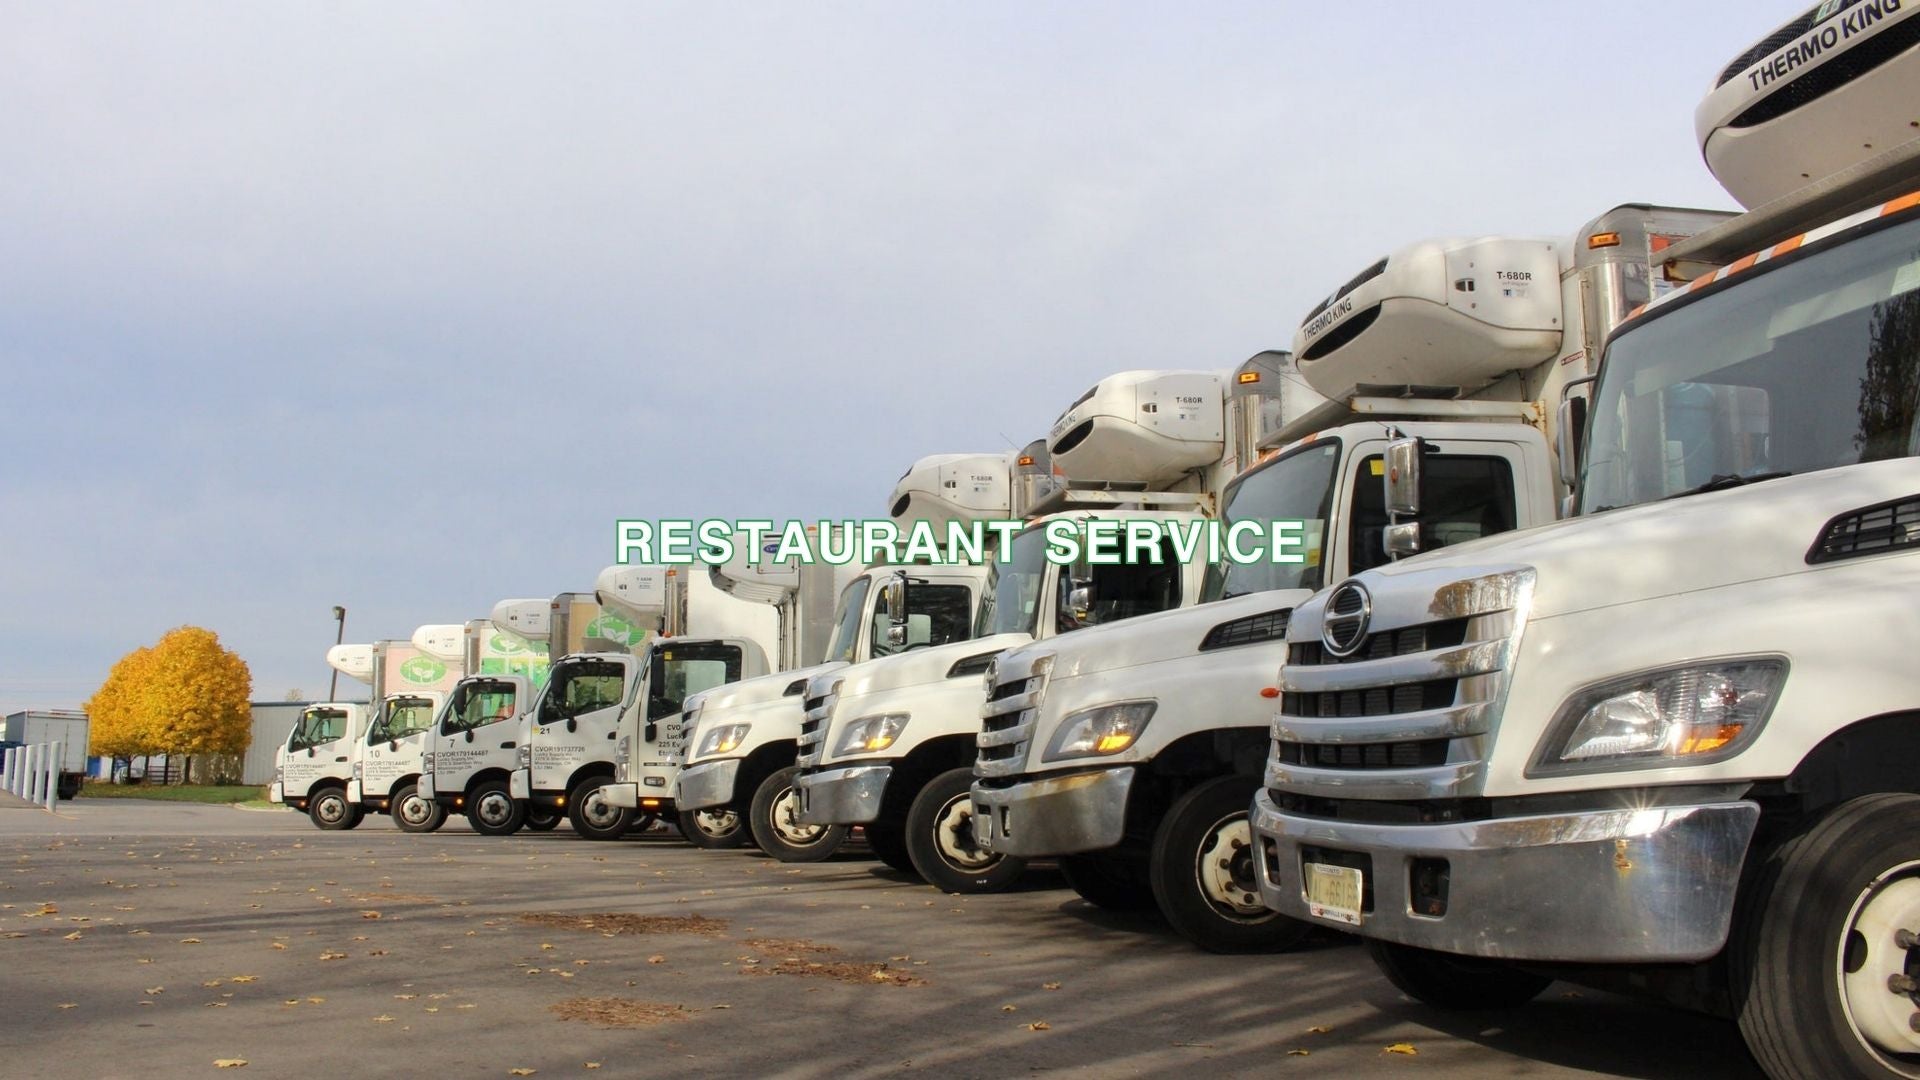 This is a picture of trucks of Lucky Supply. Shows how professional Lucky supply is. There is a line of text in the middle saids "Restaurant Service" which explain our purpose of business